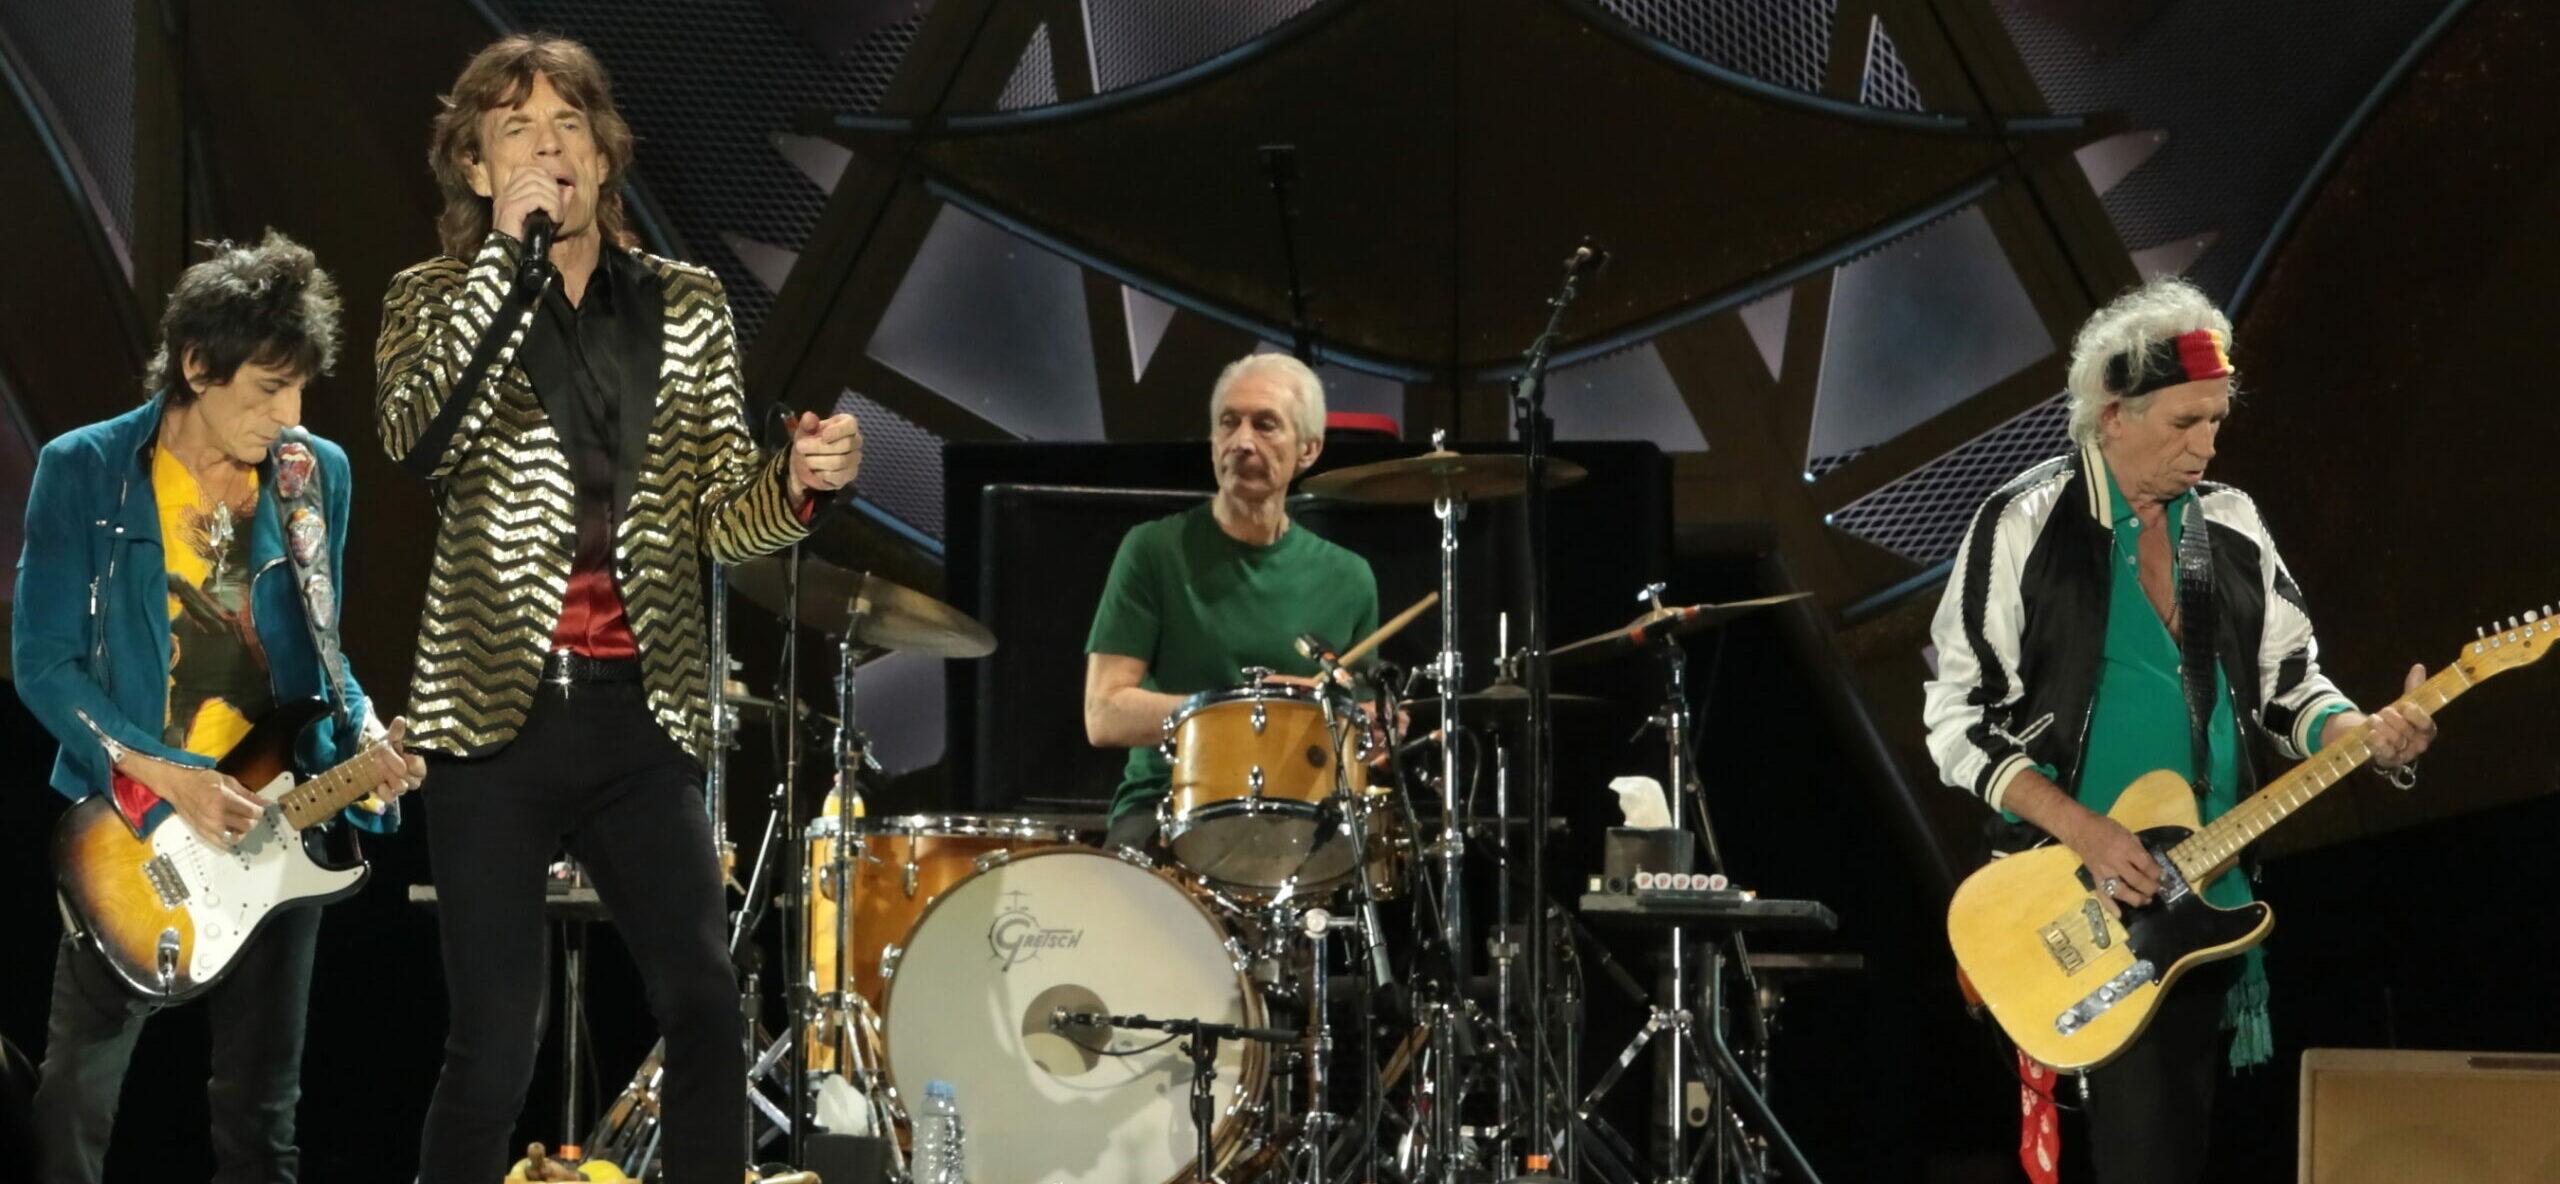 Charlie Watts of Rolling Stones dies at 80 after an heart urgence surgery File images